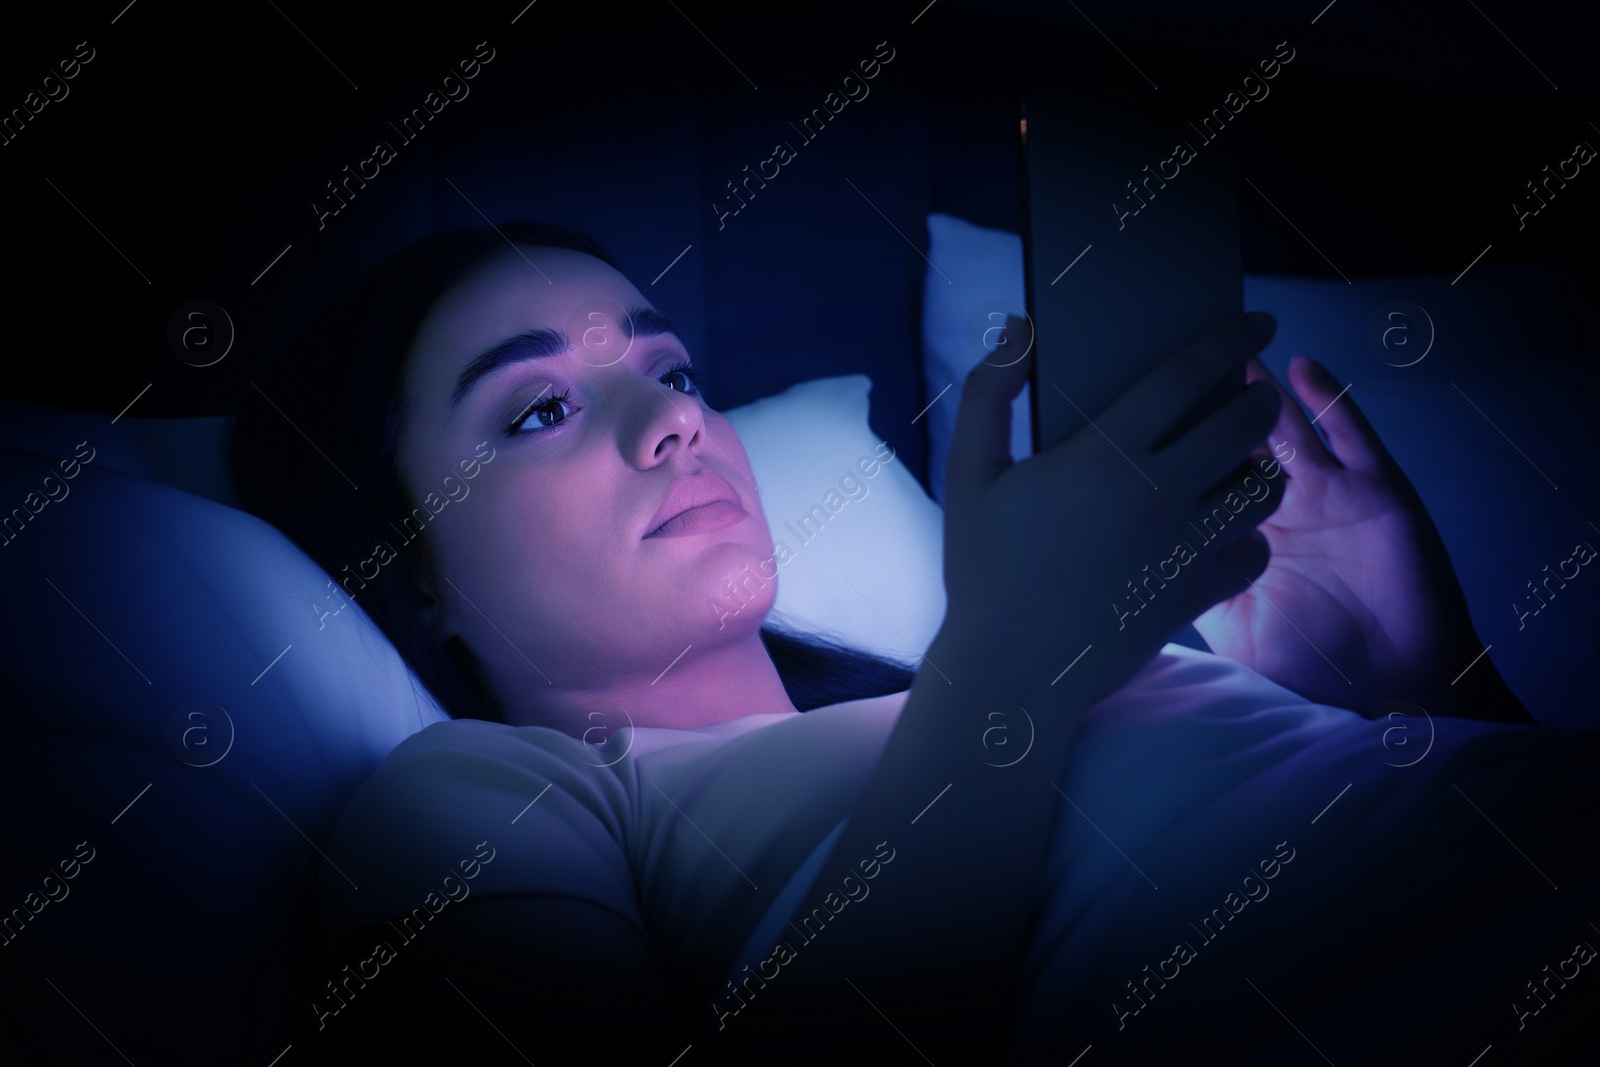 Image of Internet addiction. Woman using smartphone on bed at night. Toned in blue